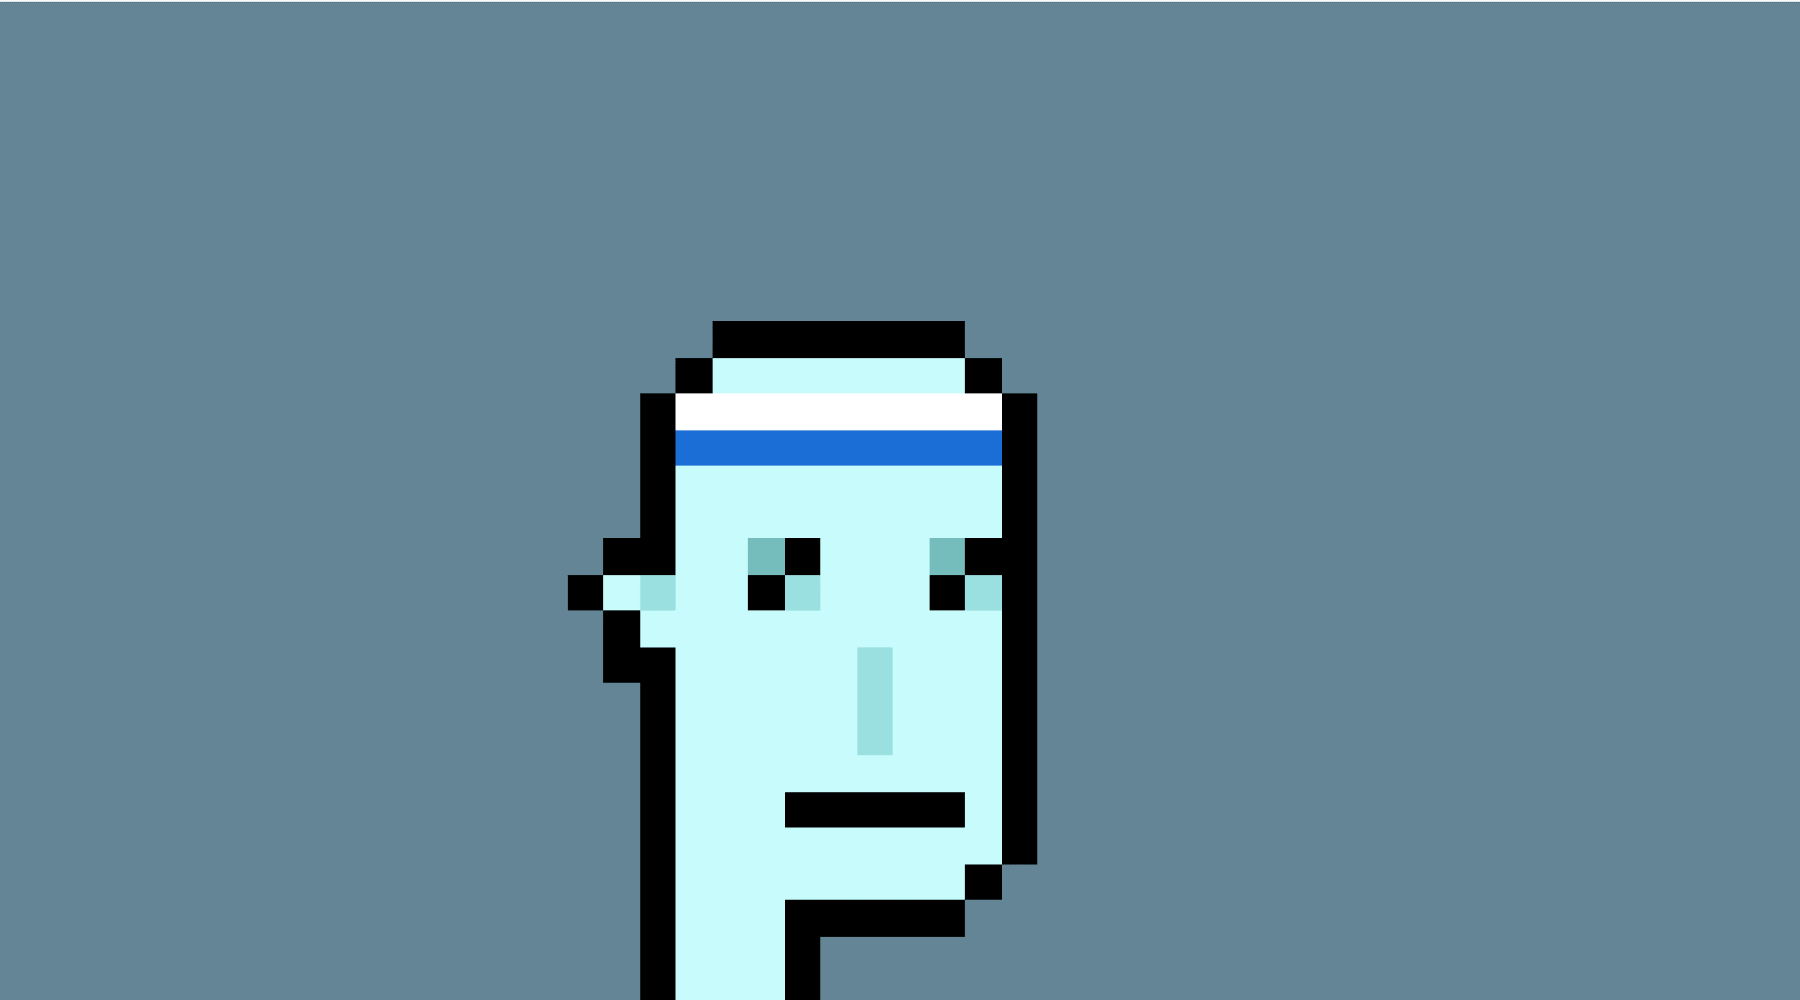 Larva Labs "CryptoPunk #3100" — a blue-skinned Alien Punk wearing a white and blue headband